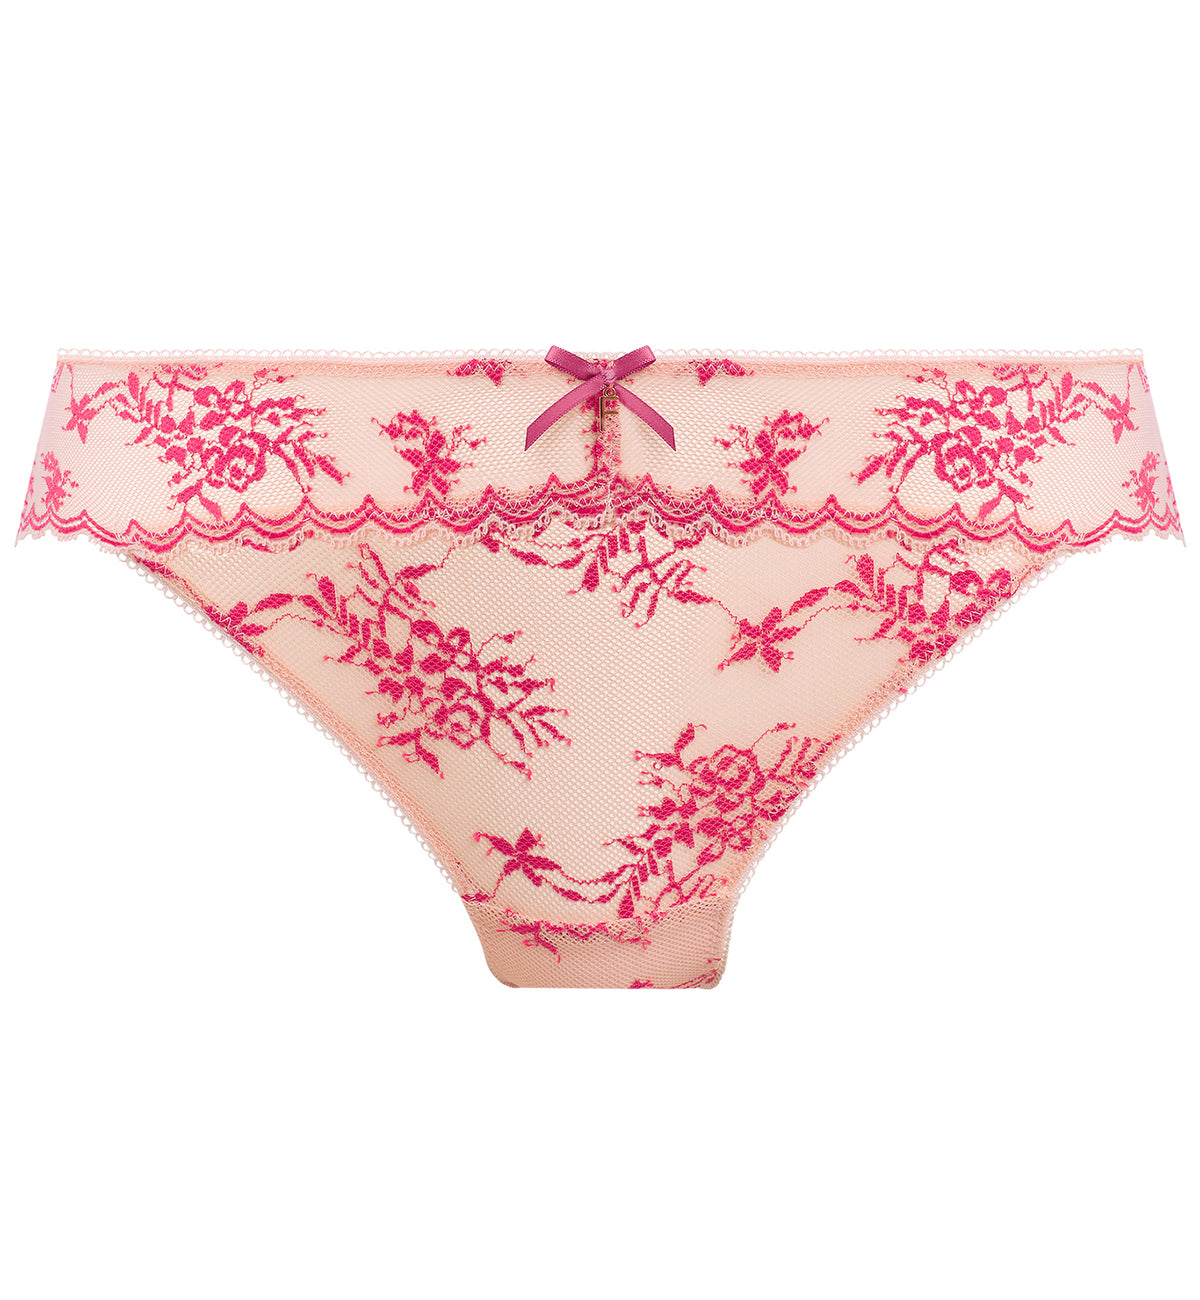 Freya Offbeat Decadence Lace Panty Brief (402550),Small,Vintage Rose - Vintage Rose,Small